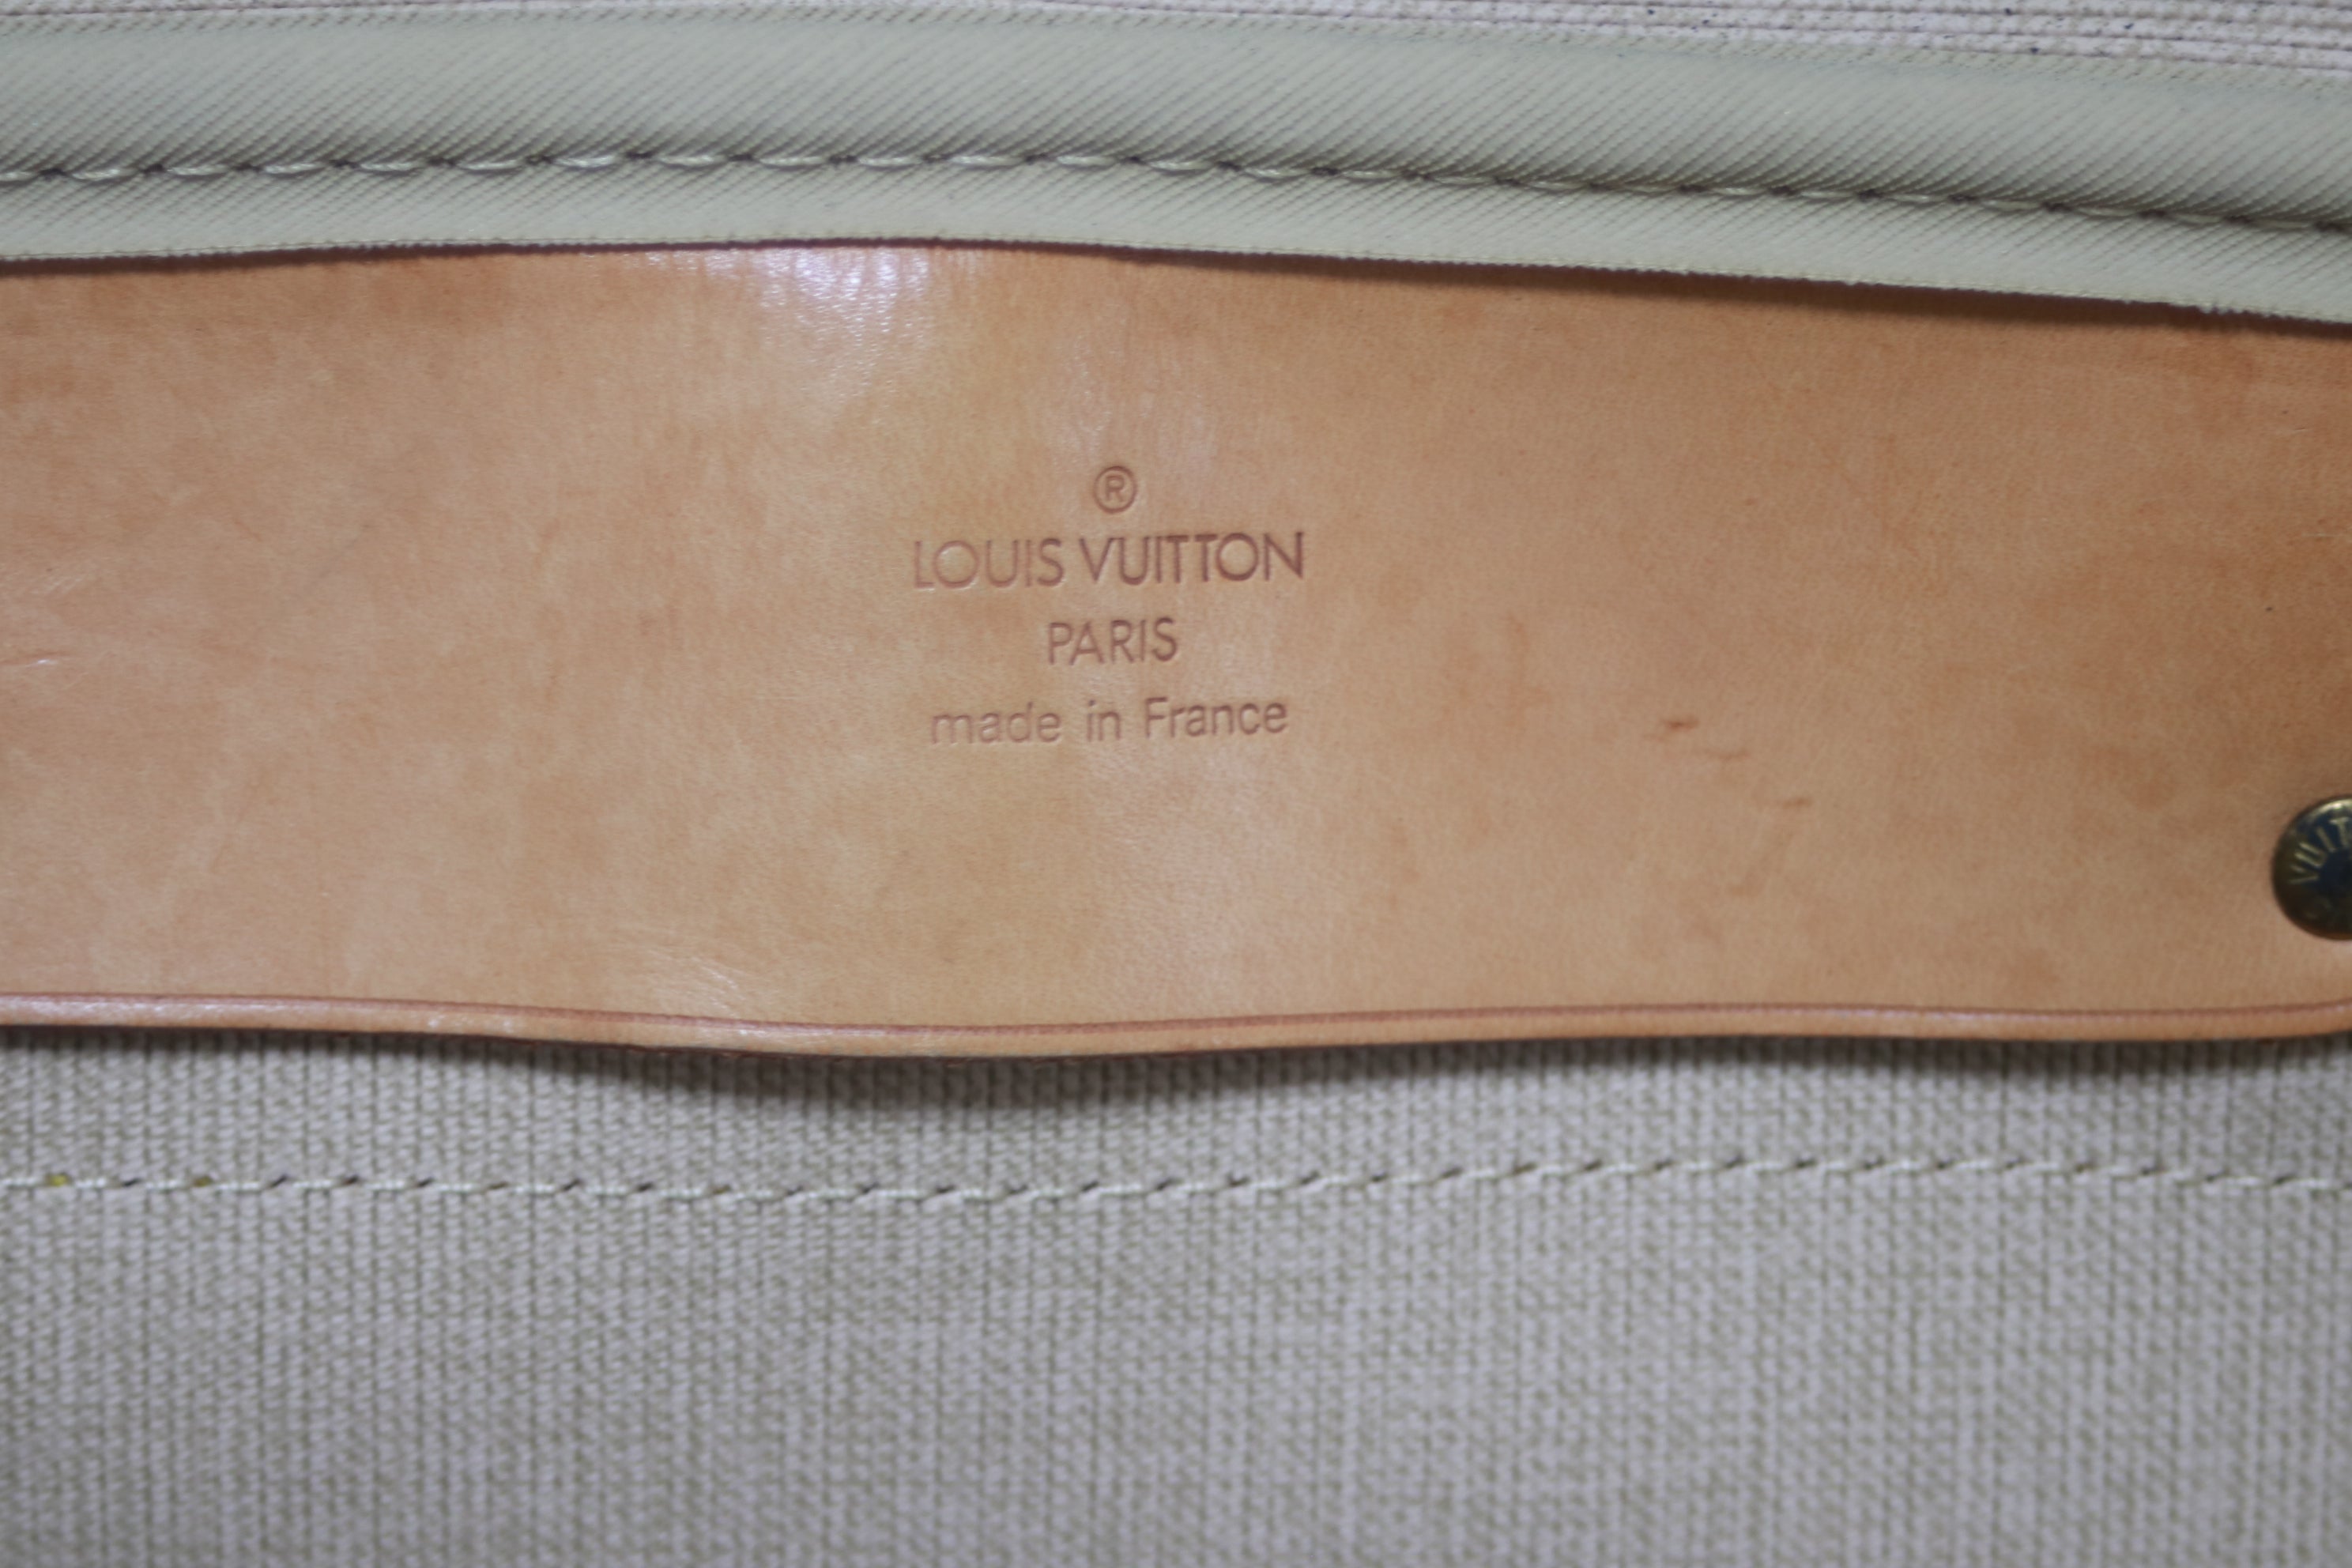 Louis Vuitton Alize Travel Bag Used (8343)